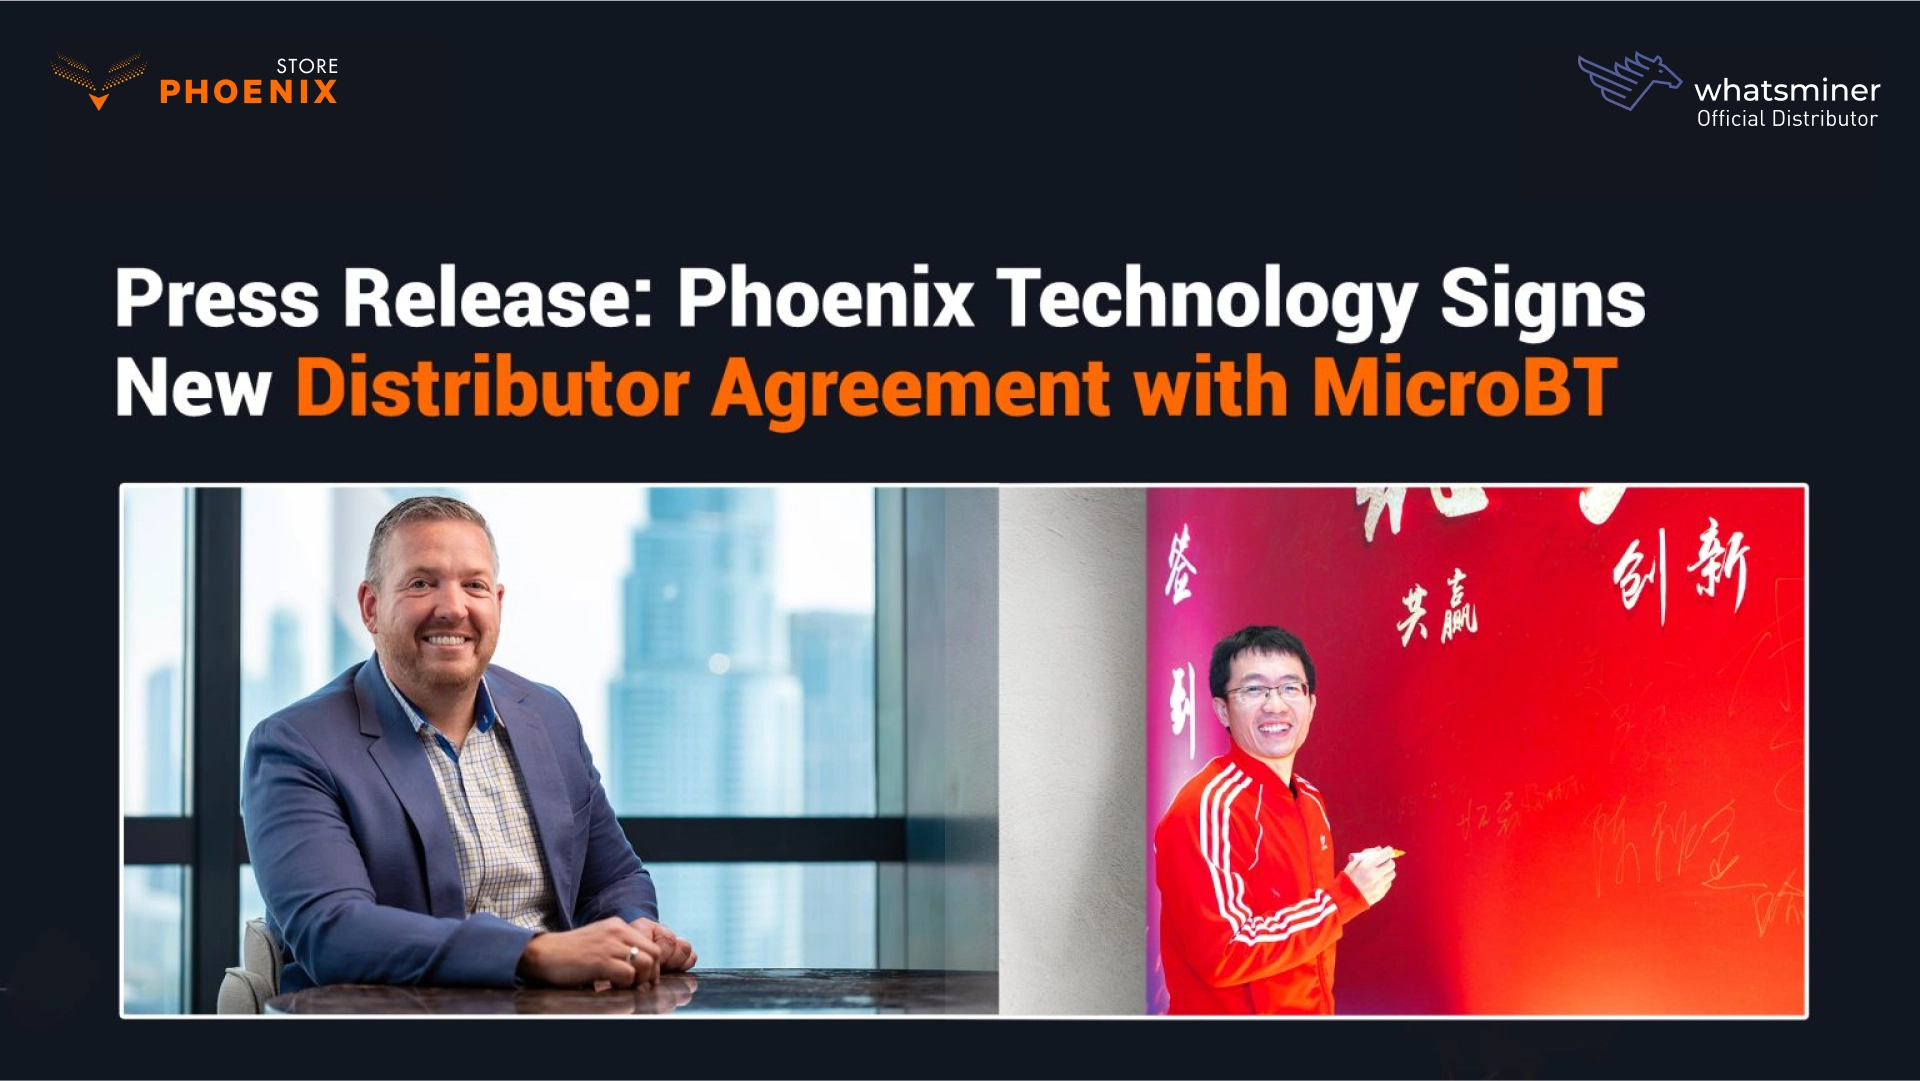 Press Release: Phoenix Technology Signs New Distributor Agreement with MicroBT, Selling Their WhatsMiner Brand